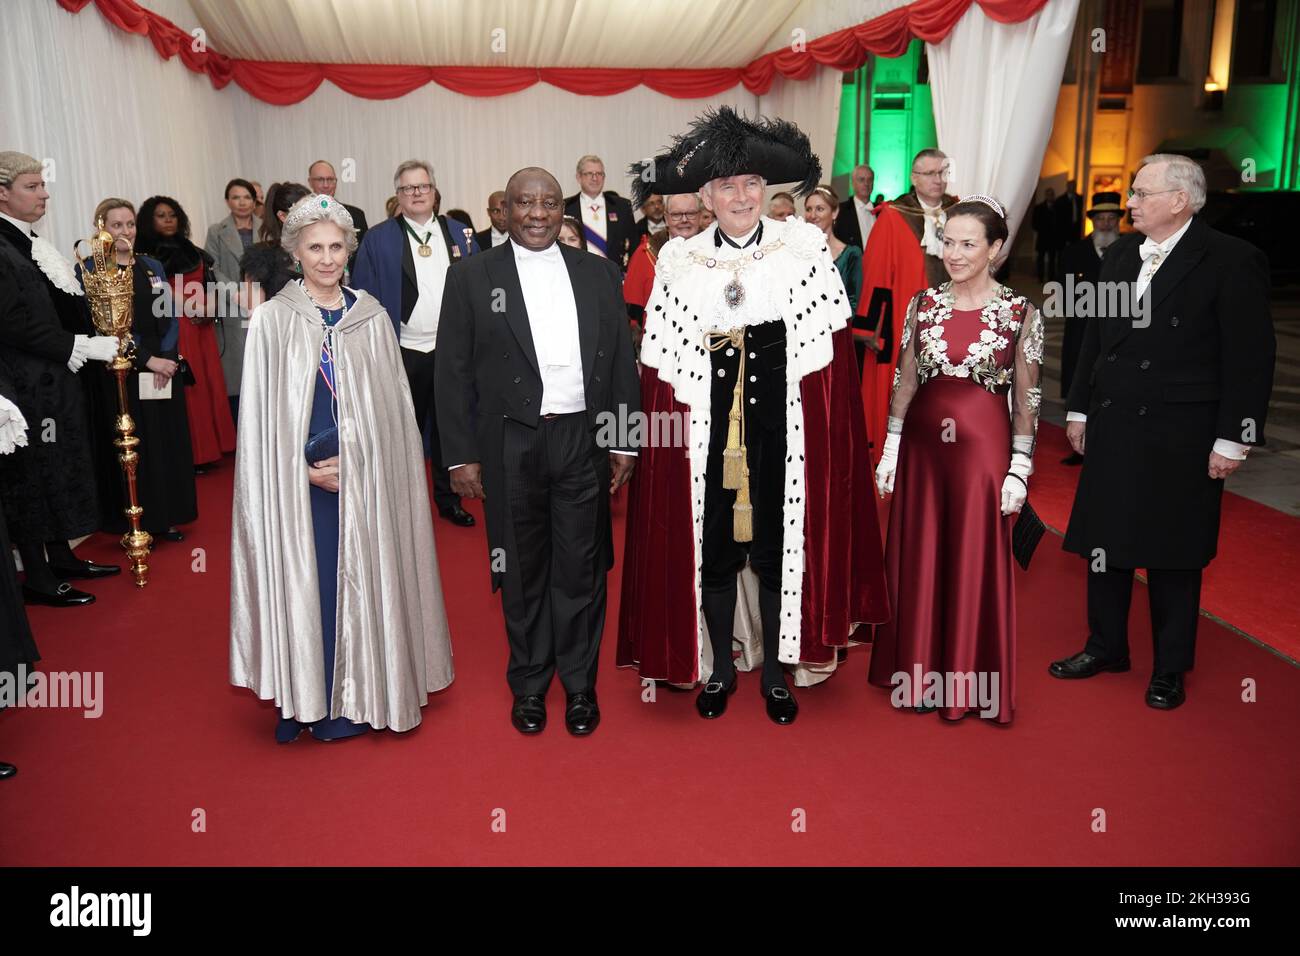 President Cyril Ramaphosa of South Africa, with the Duchess of Gloucester (left) the Lord Mayor of London, Nicholas Lyons, the Lady Mayoress of London, Felicity Lyons and the Duke of Gloucester, attend a banquet at the Guildhall in London, given by the Lord Mayor and City of London Corporation, during his state visit to the UK. Picture date: Wednesday November 23, 2022. Stock Photo